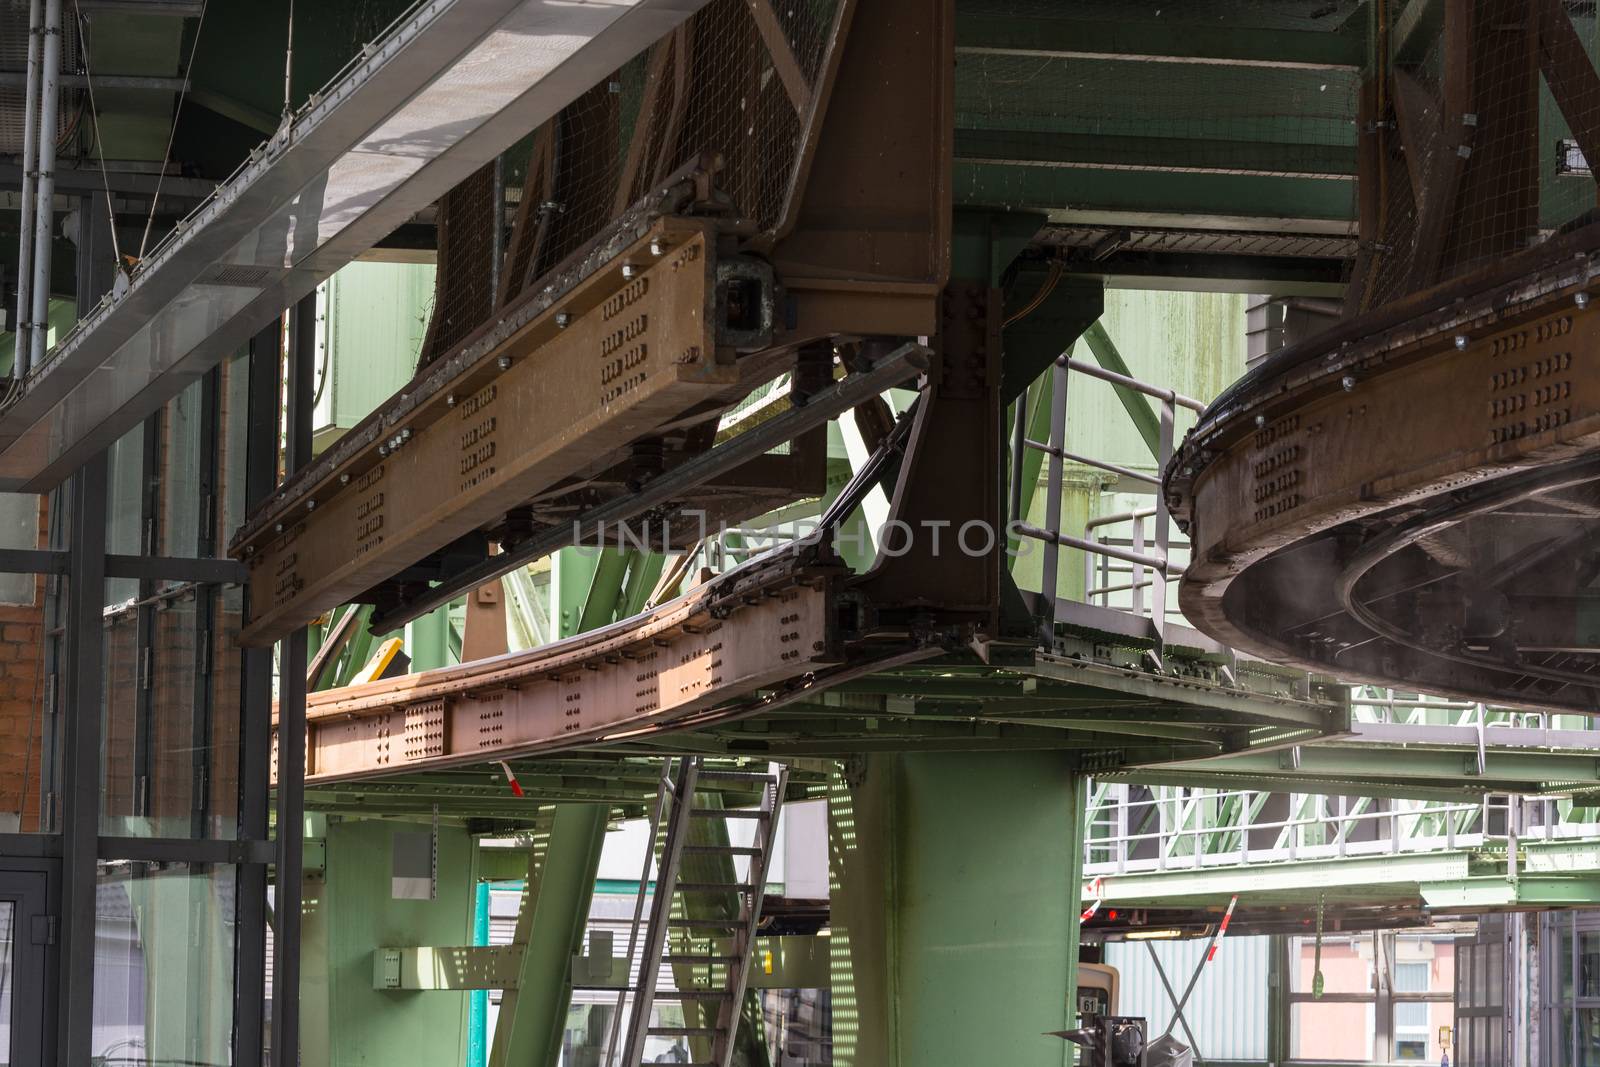 The supporting framework of the Wuppertaler suspension railway by JFsPic